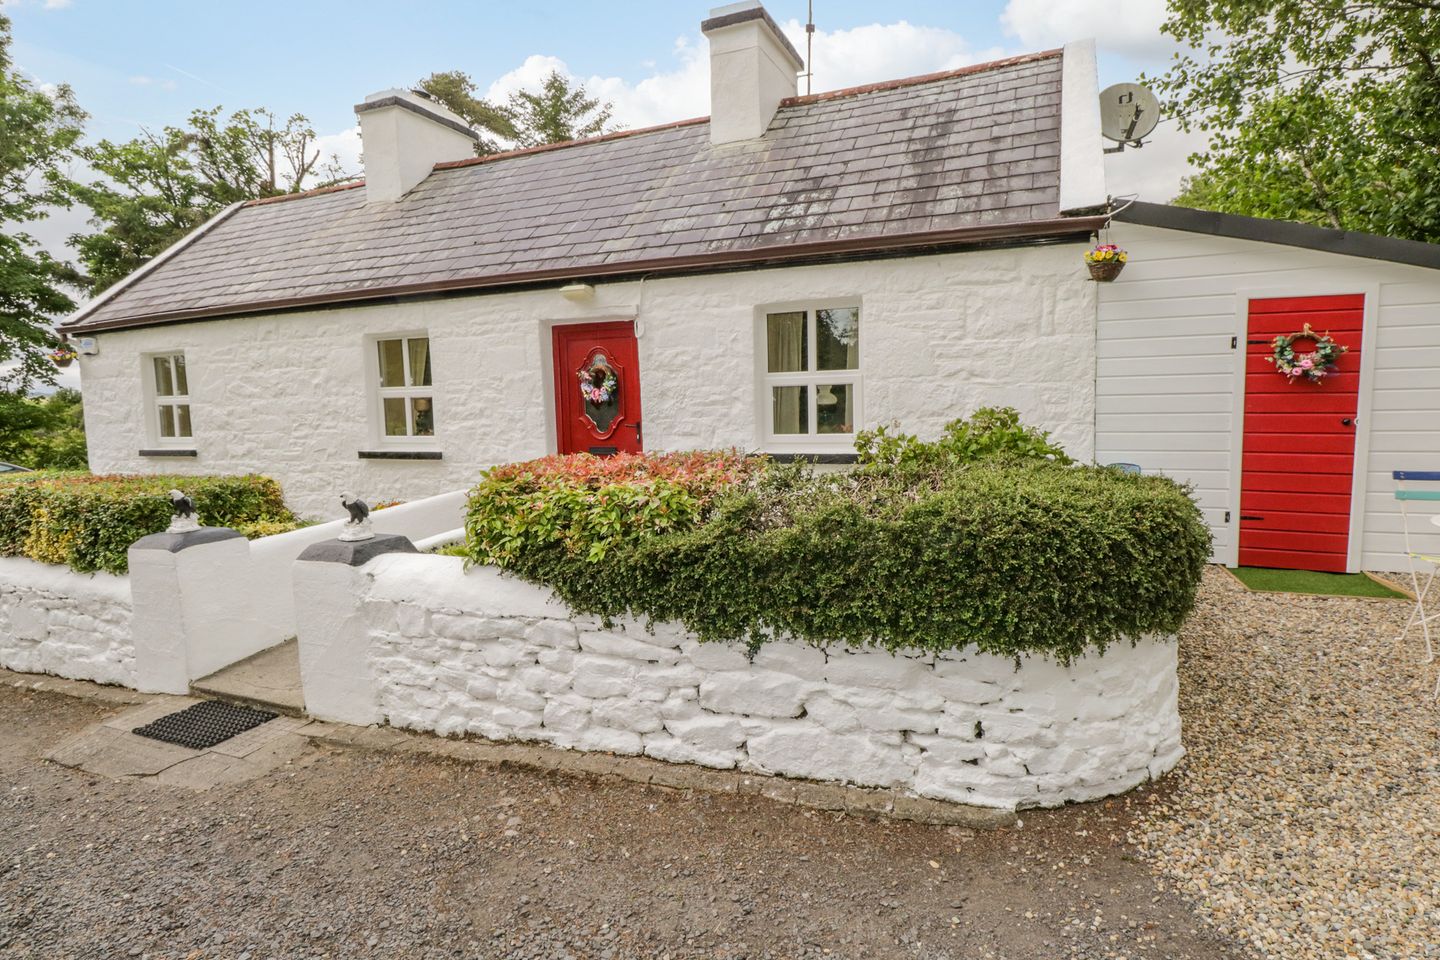 Ref. 1111008 Cartron Cottage, Cartron Cottage, Bal, Claremorris, Co. Mayo